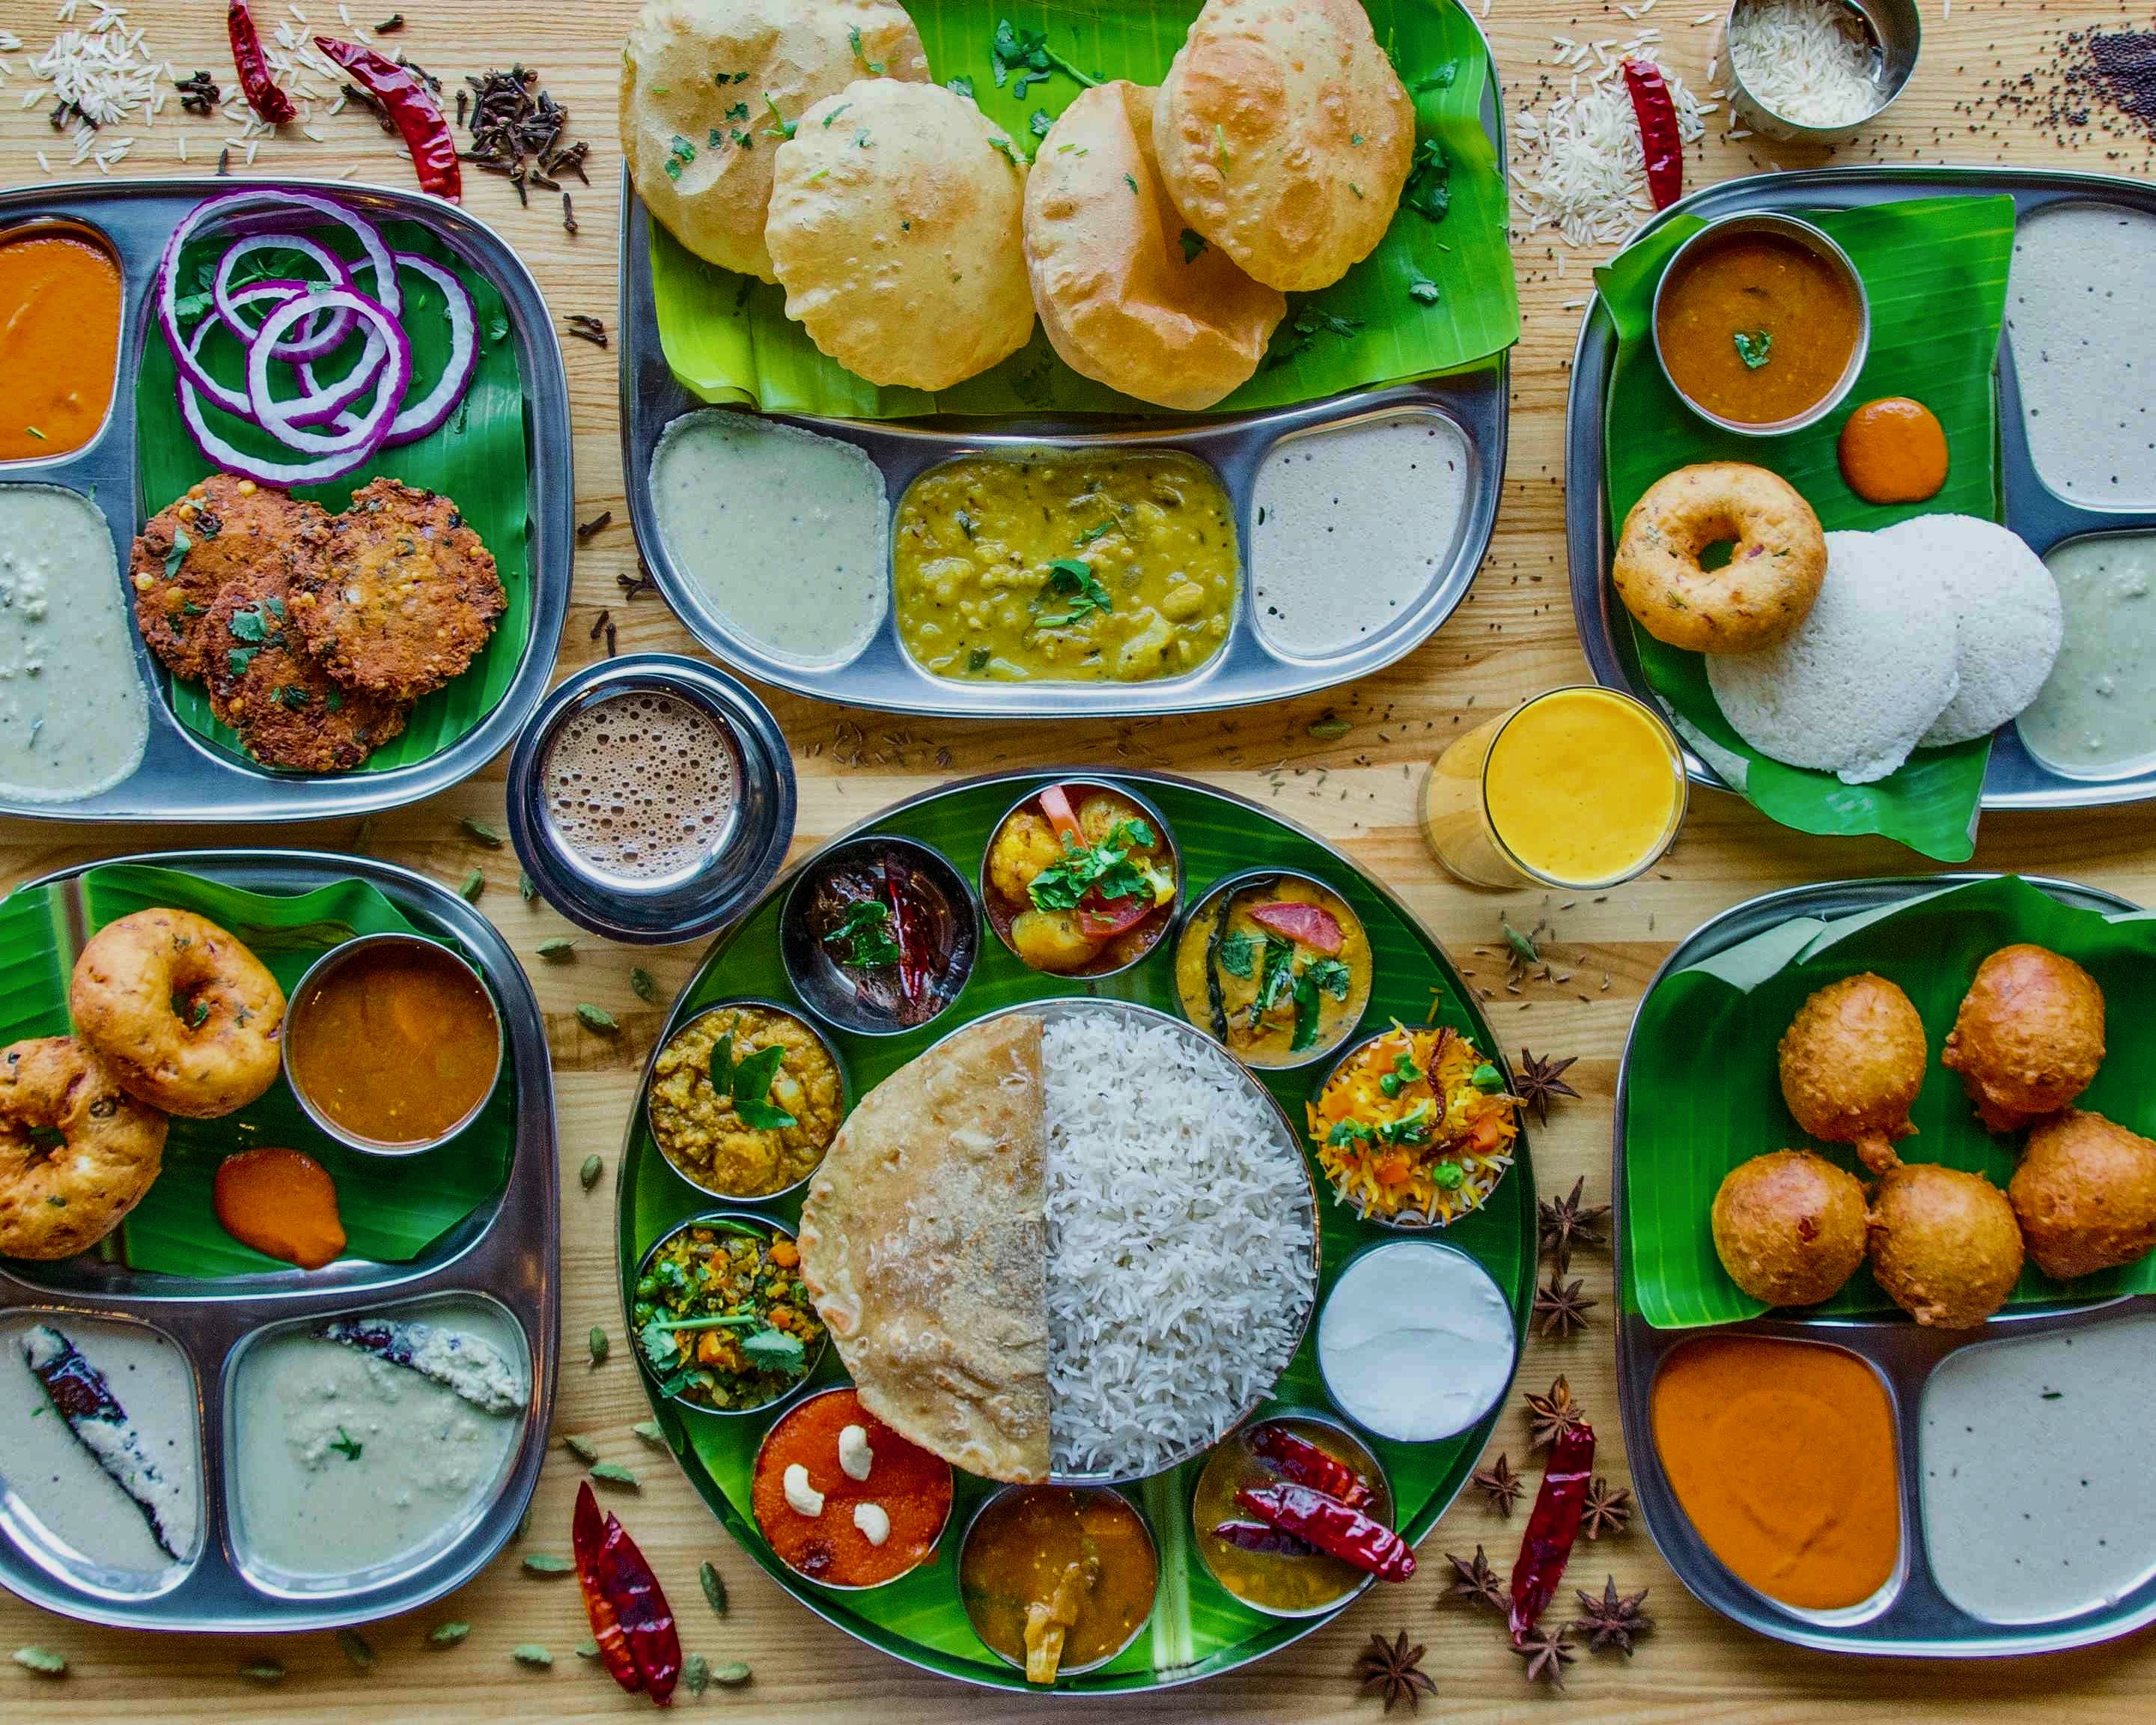 South-Indian delicious food